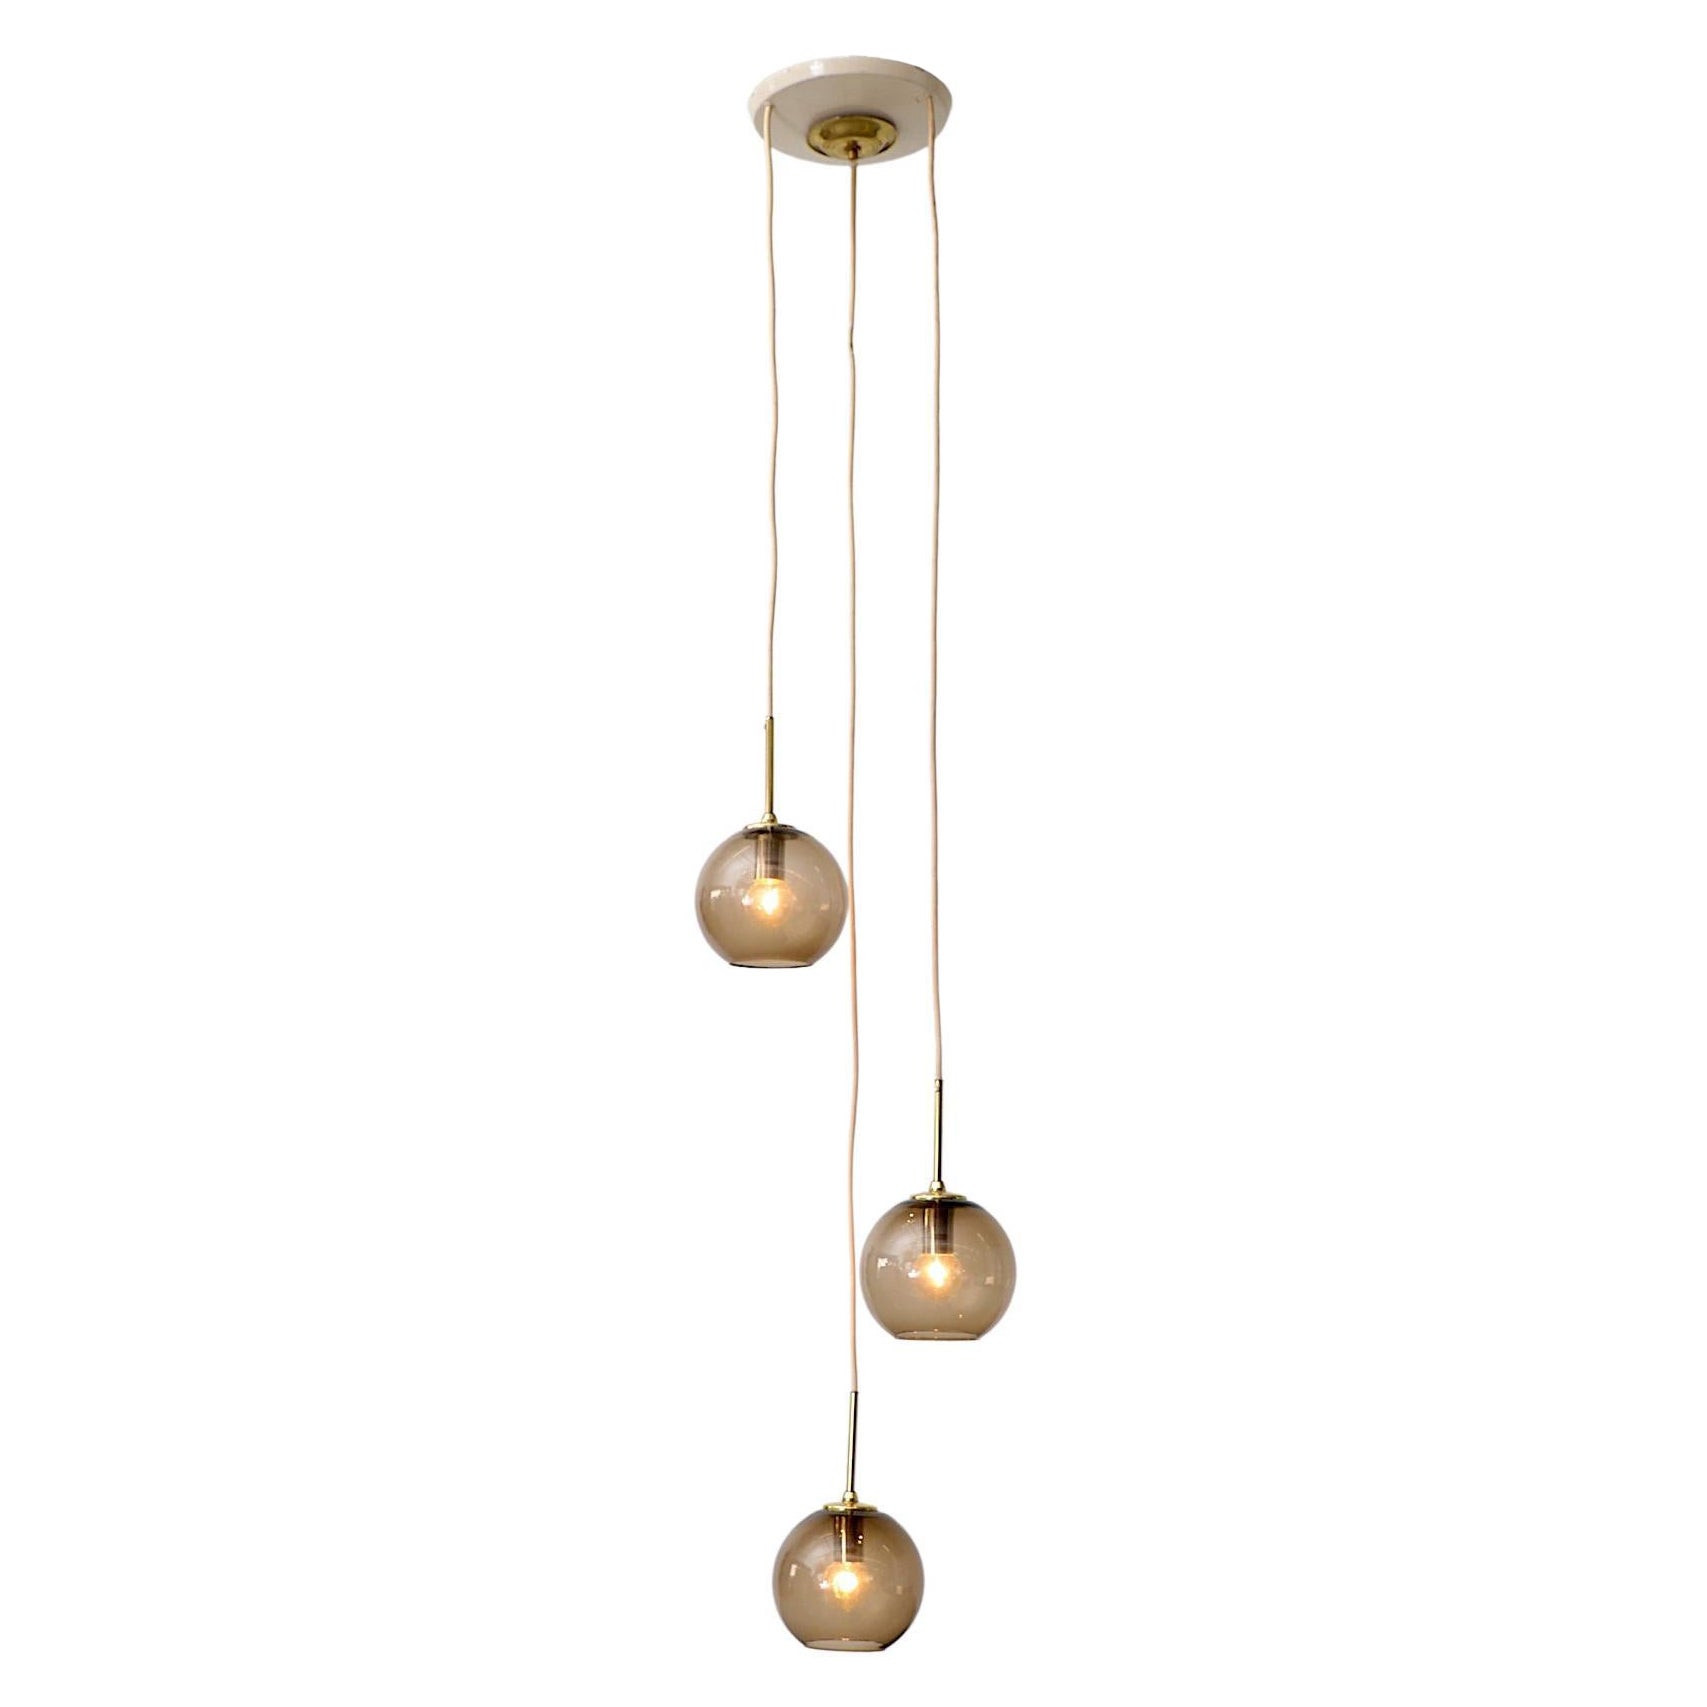 1970s Chandelier with 3 Smoked Glass Globes, Brass Hardware and Triple Canopy For Sale